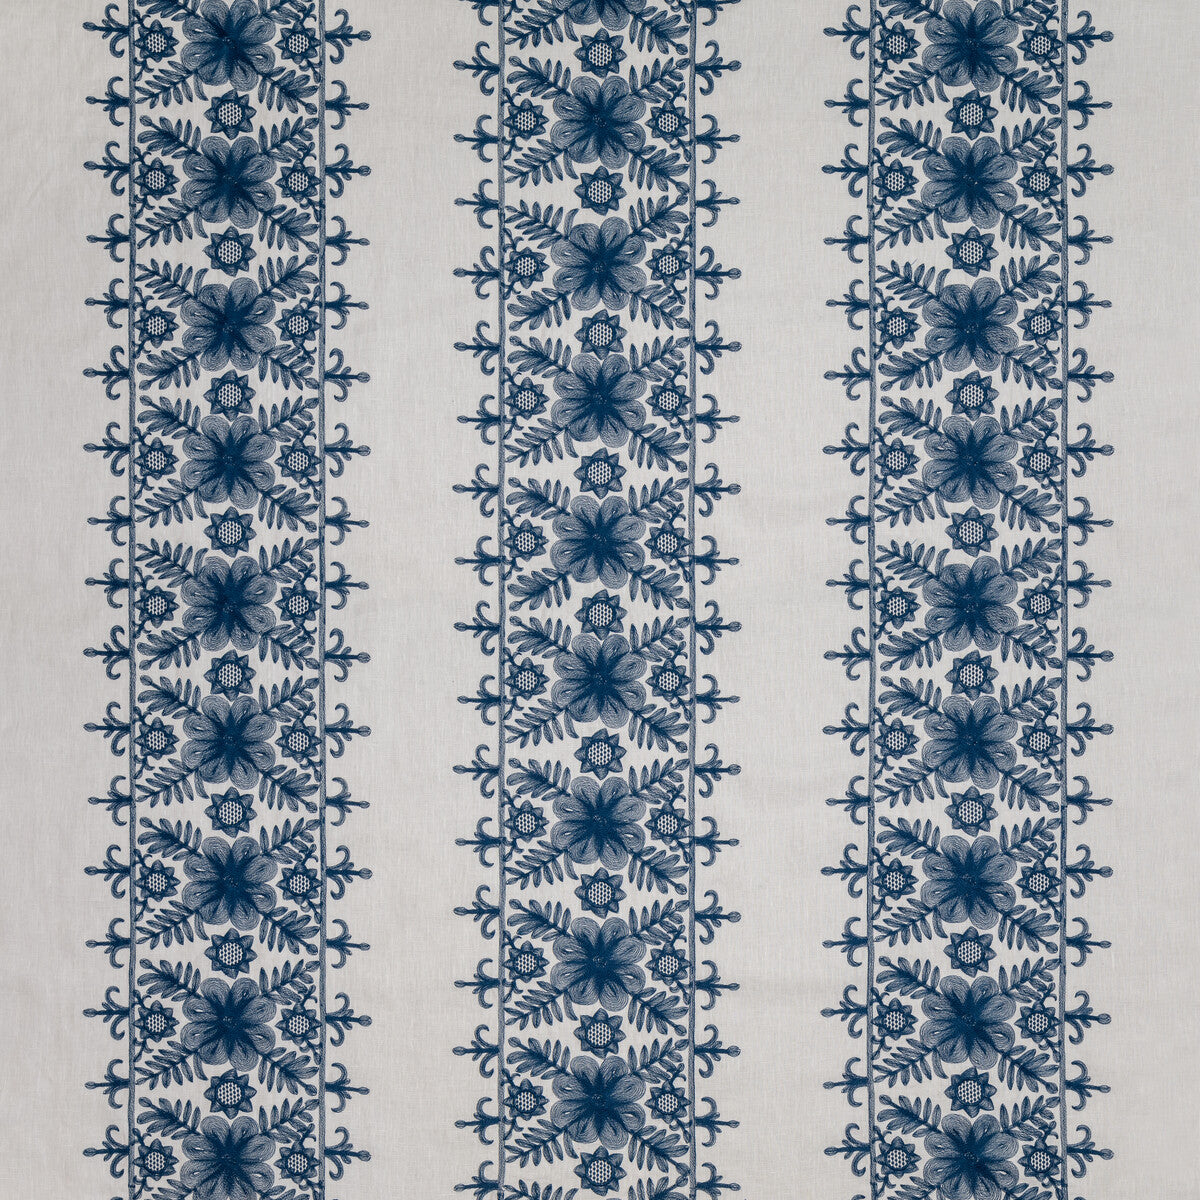 Angelica fabric in navy color - pattern BFC-3684.51.0 - by Lee Jofa in the Blithfield collection